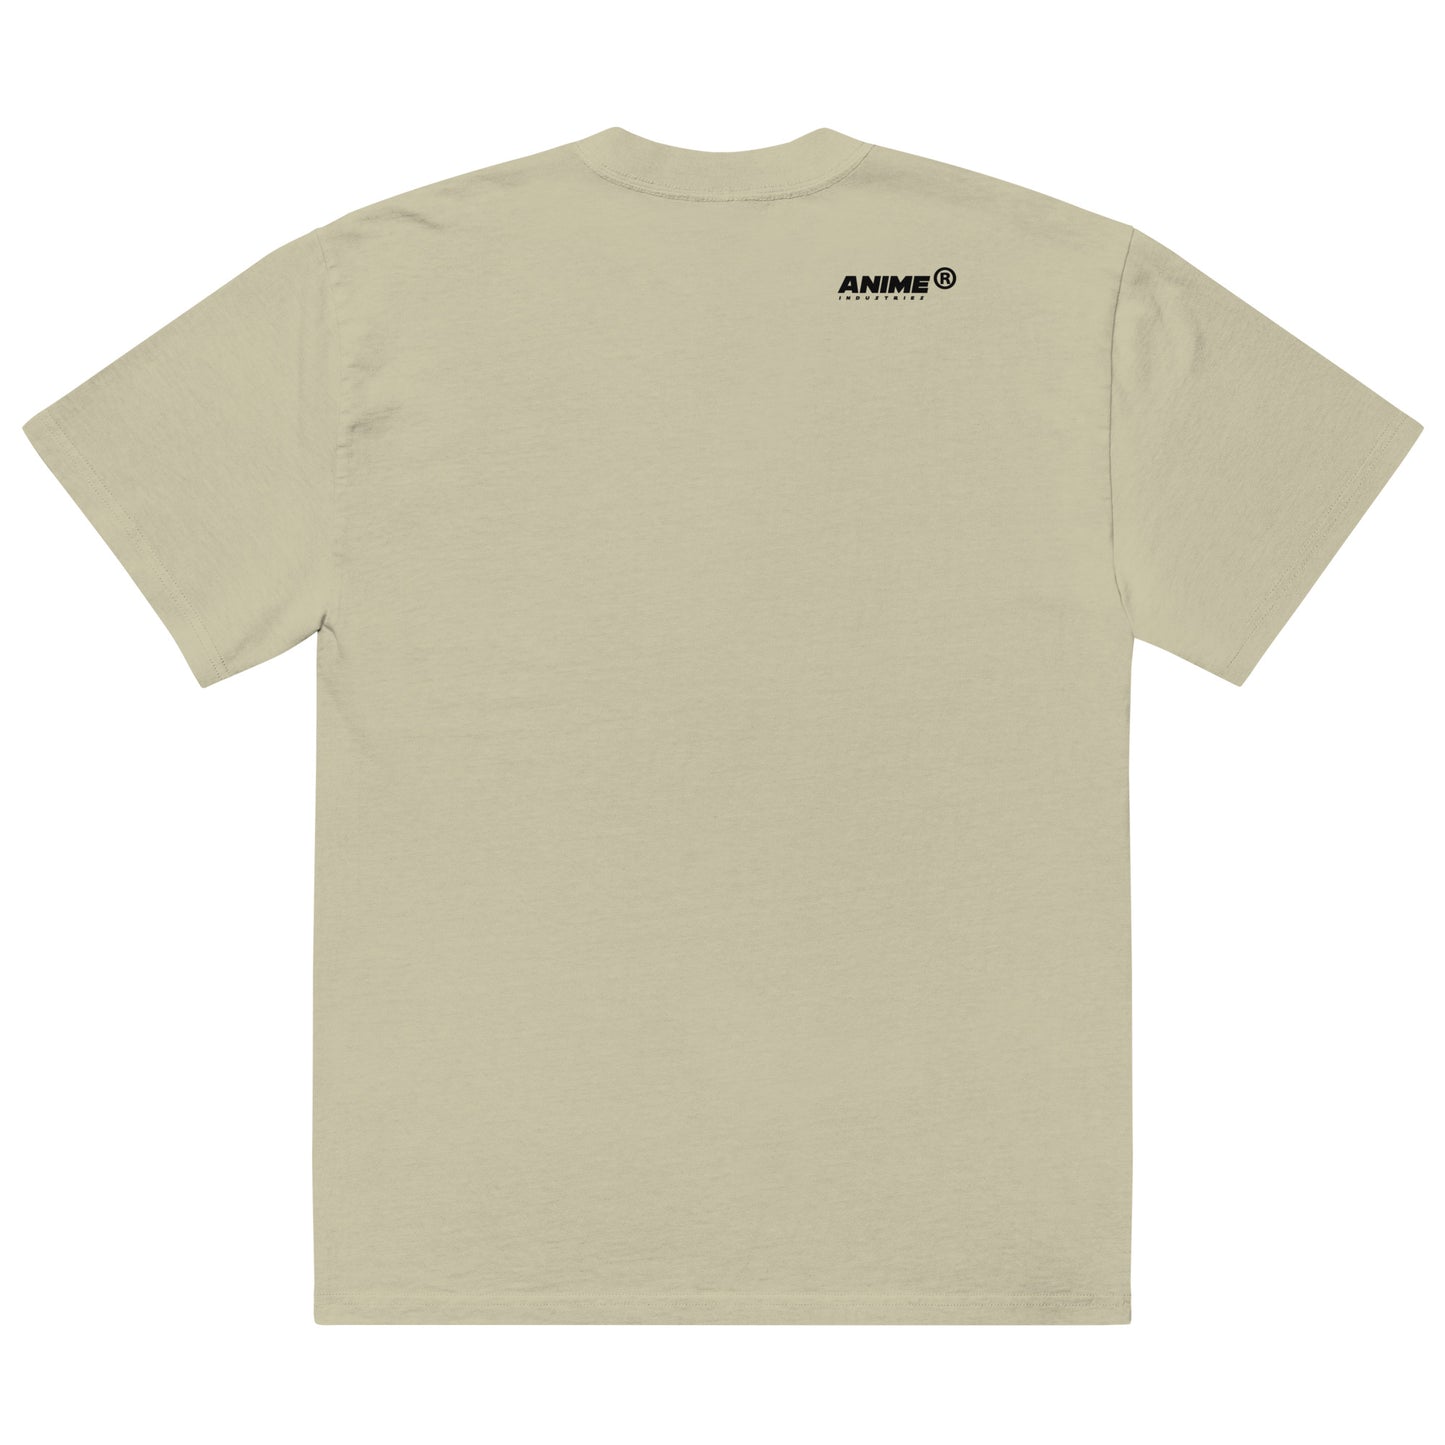 Anime Industries ® BZP Oversized faded t-shirt